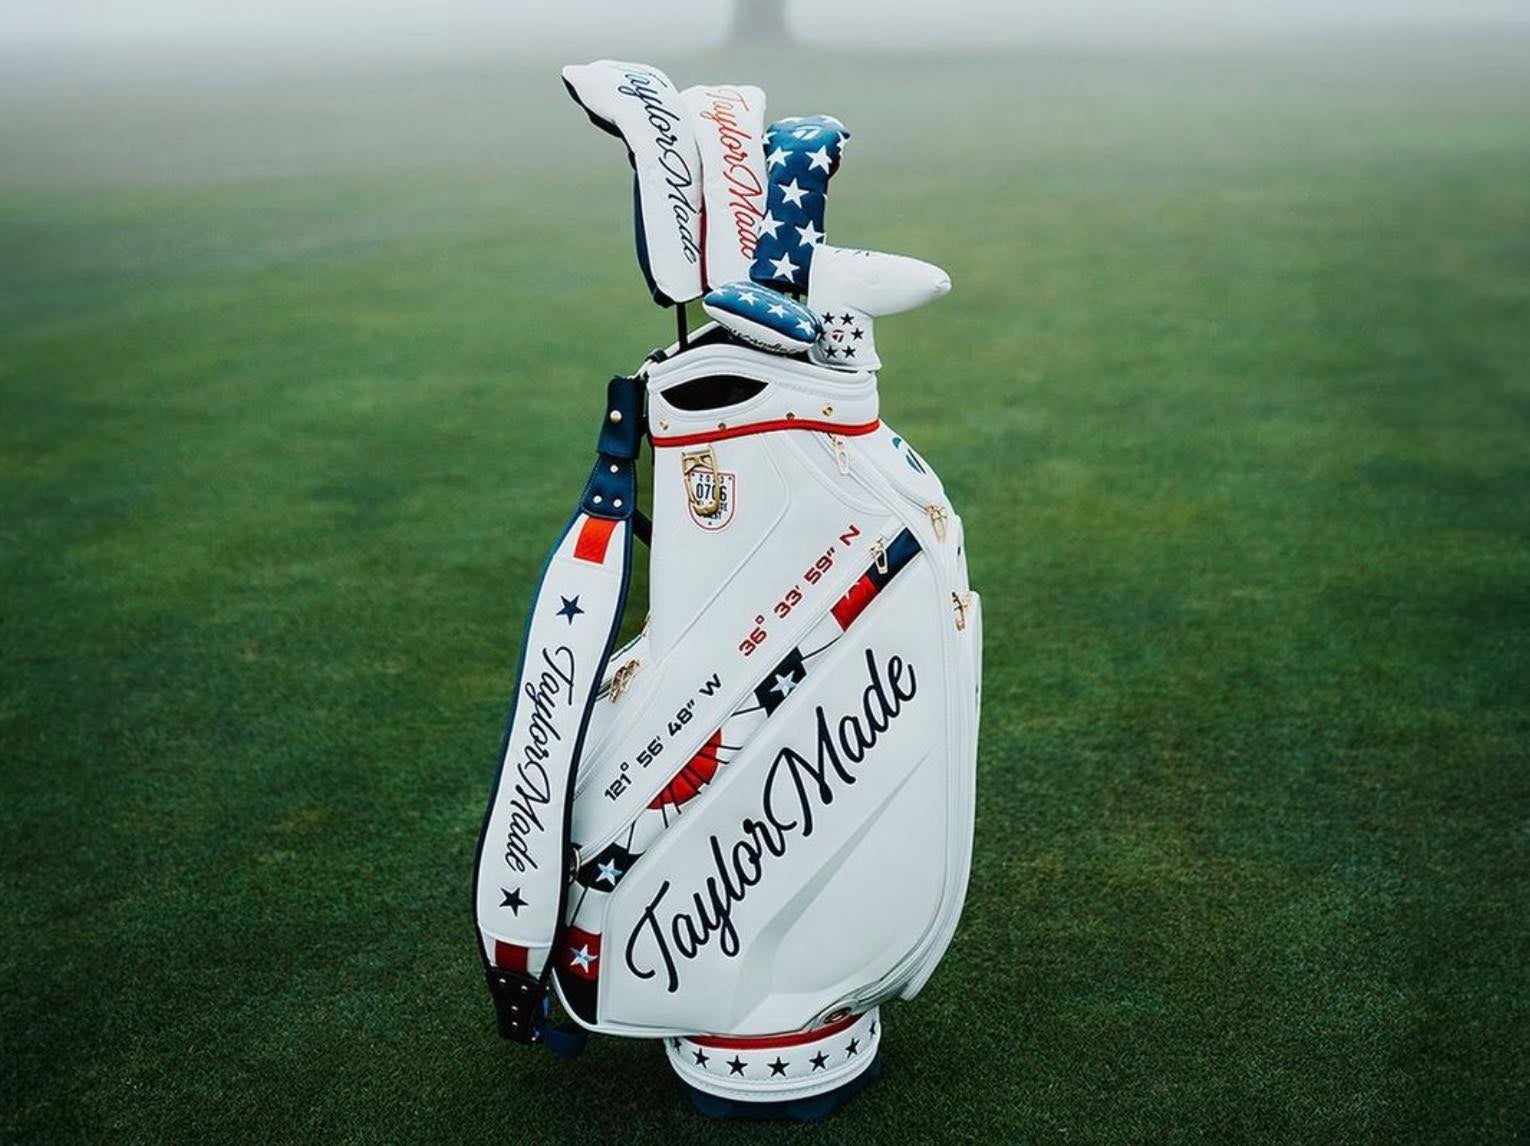 Callaway and TaylorMade Bring Limited Edition Bags to the US Women's